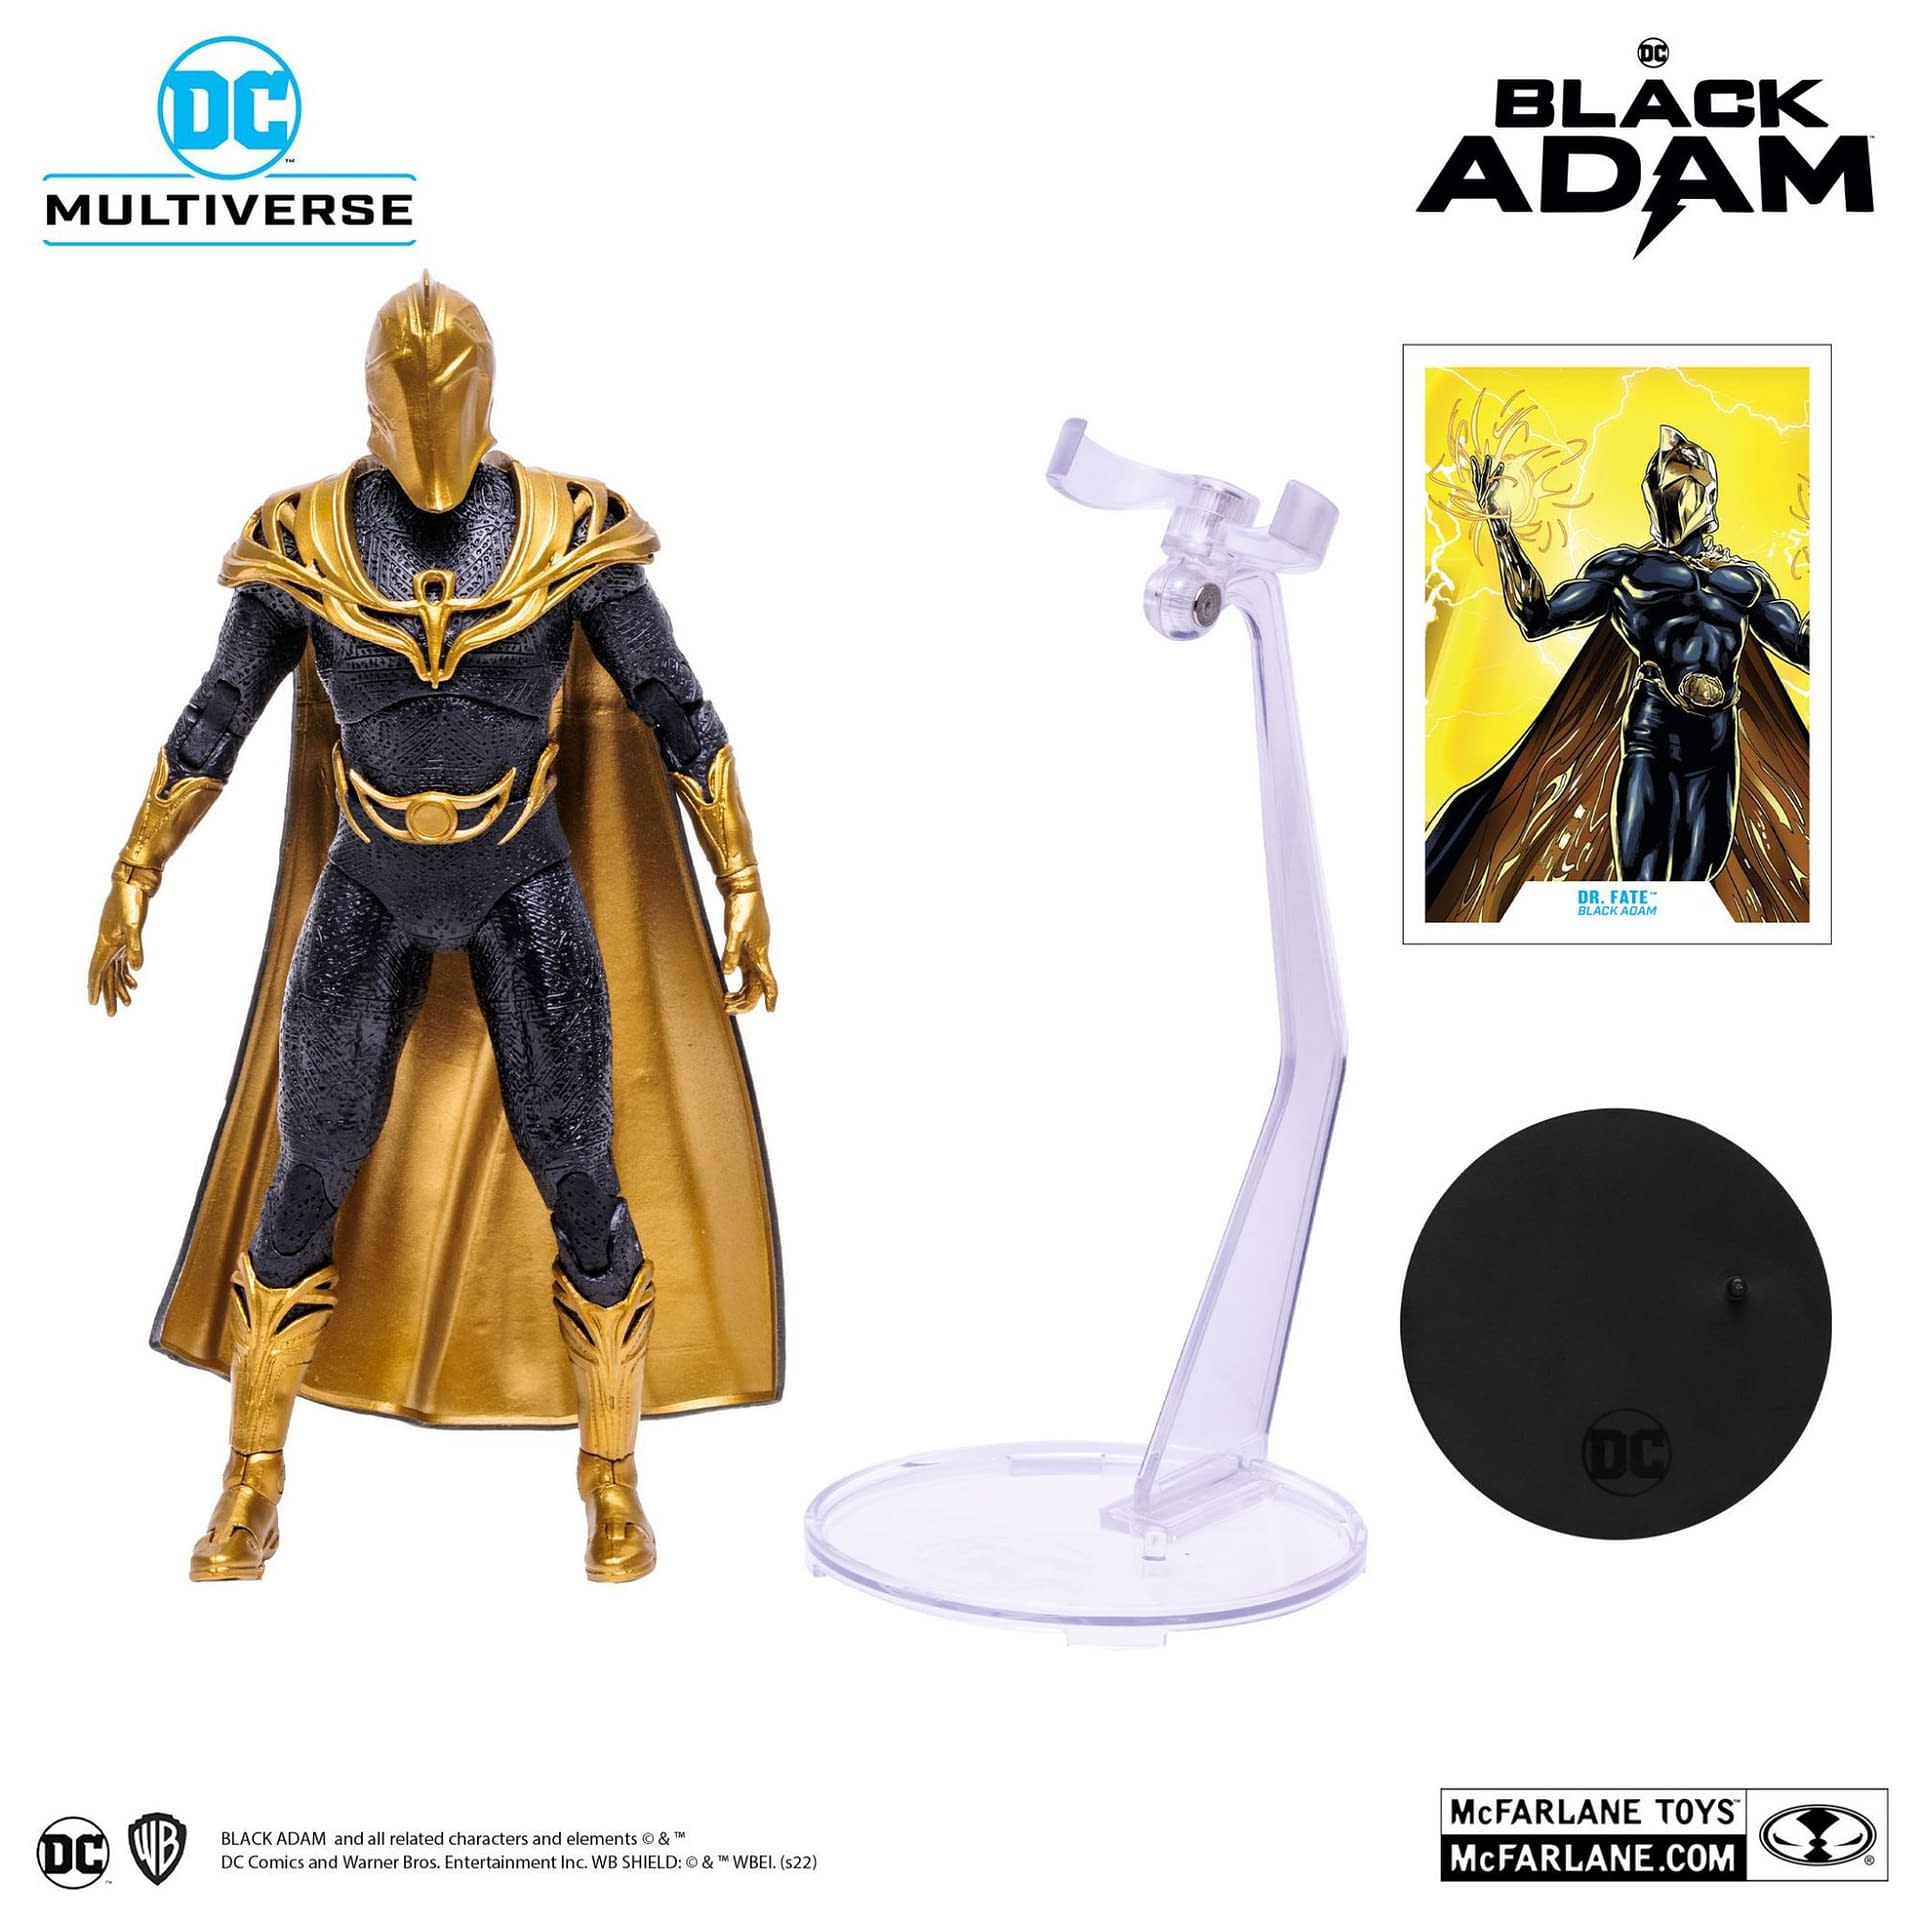 Dr. Fate Enters the World of Black Adam with New McFarlane Figure 